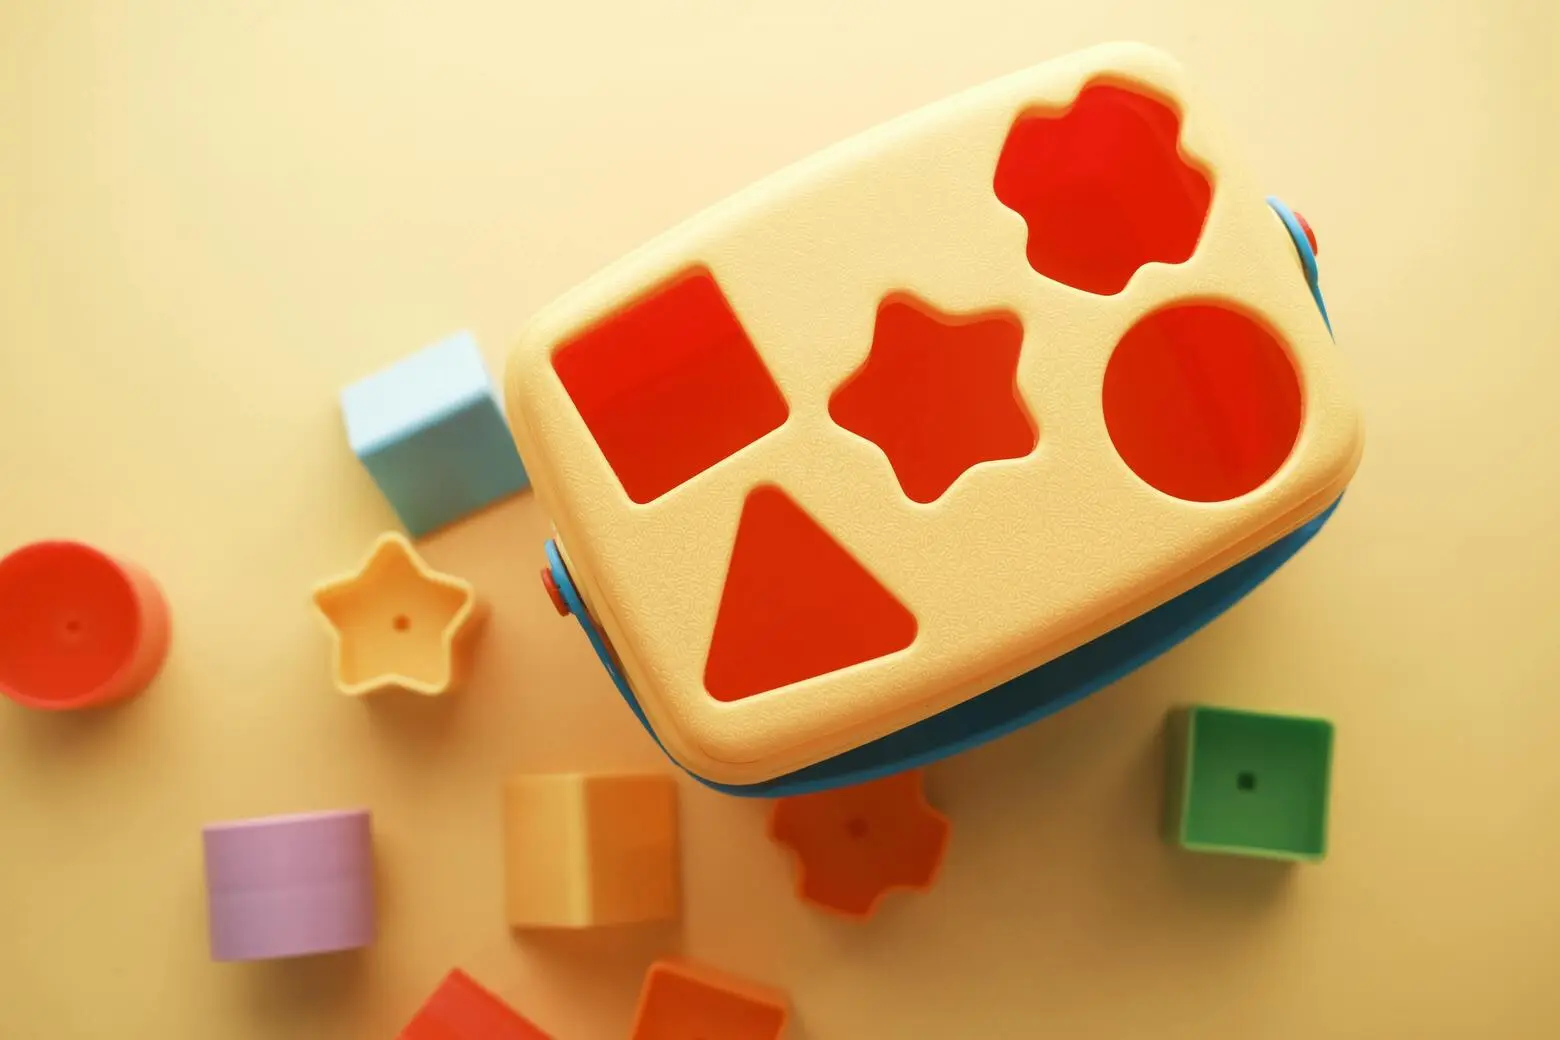 Shape sorter of multiple kinds of shapes and colors.